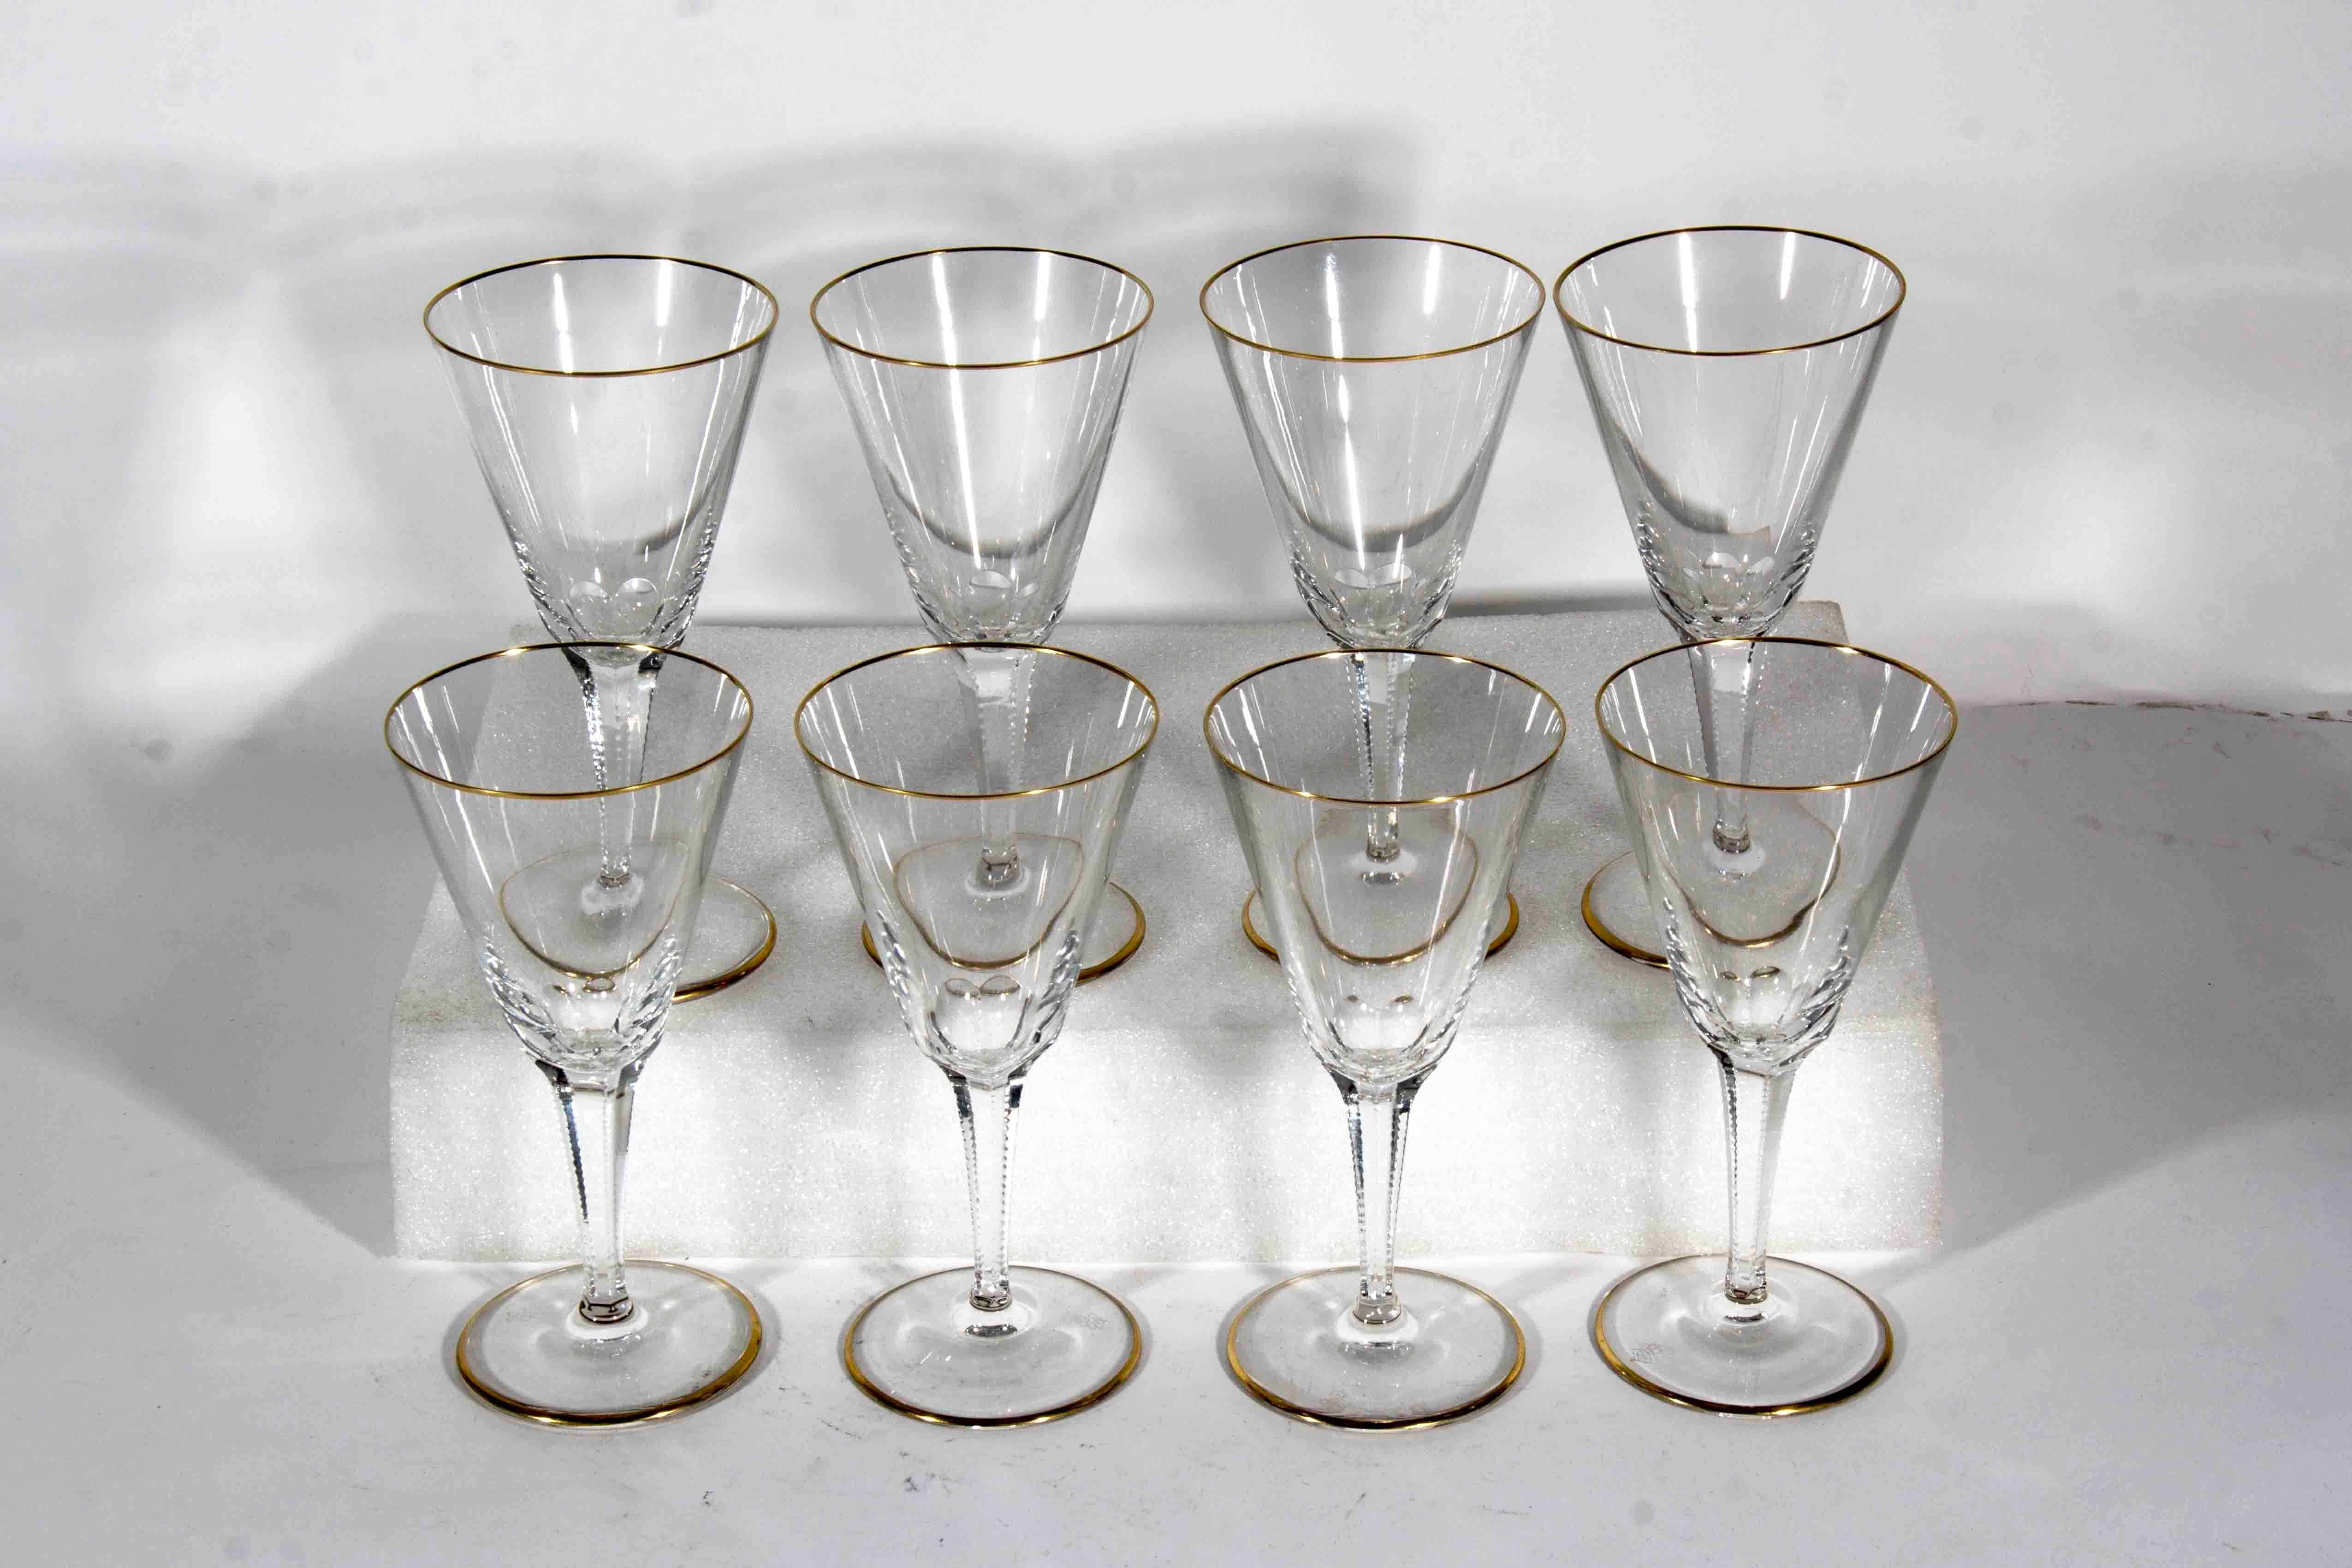 Crystal Antique Stamped Wine Glasses with Gold Trim